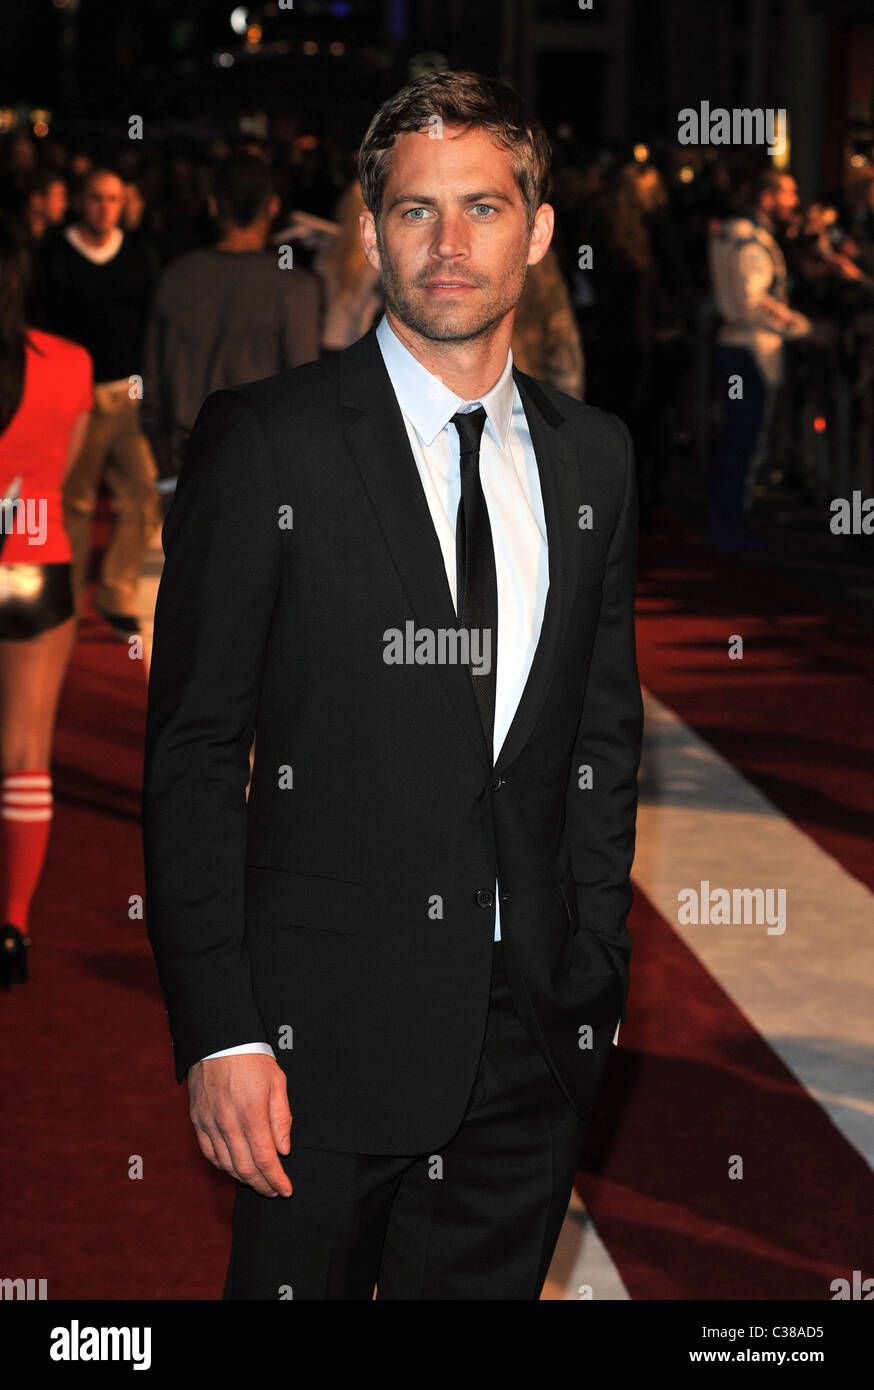 Paul Walker Fast & Furious - UK film premiere held at the Vue West. London, England - 19.03.09 : Stock Photo